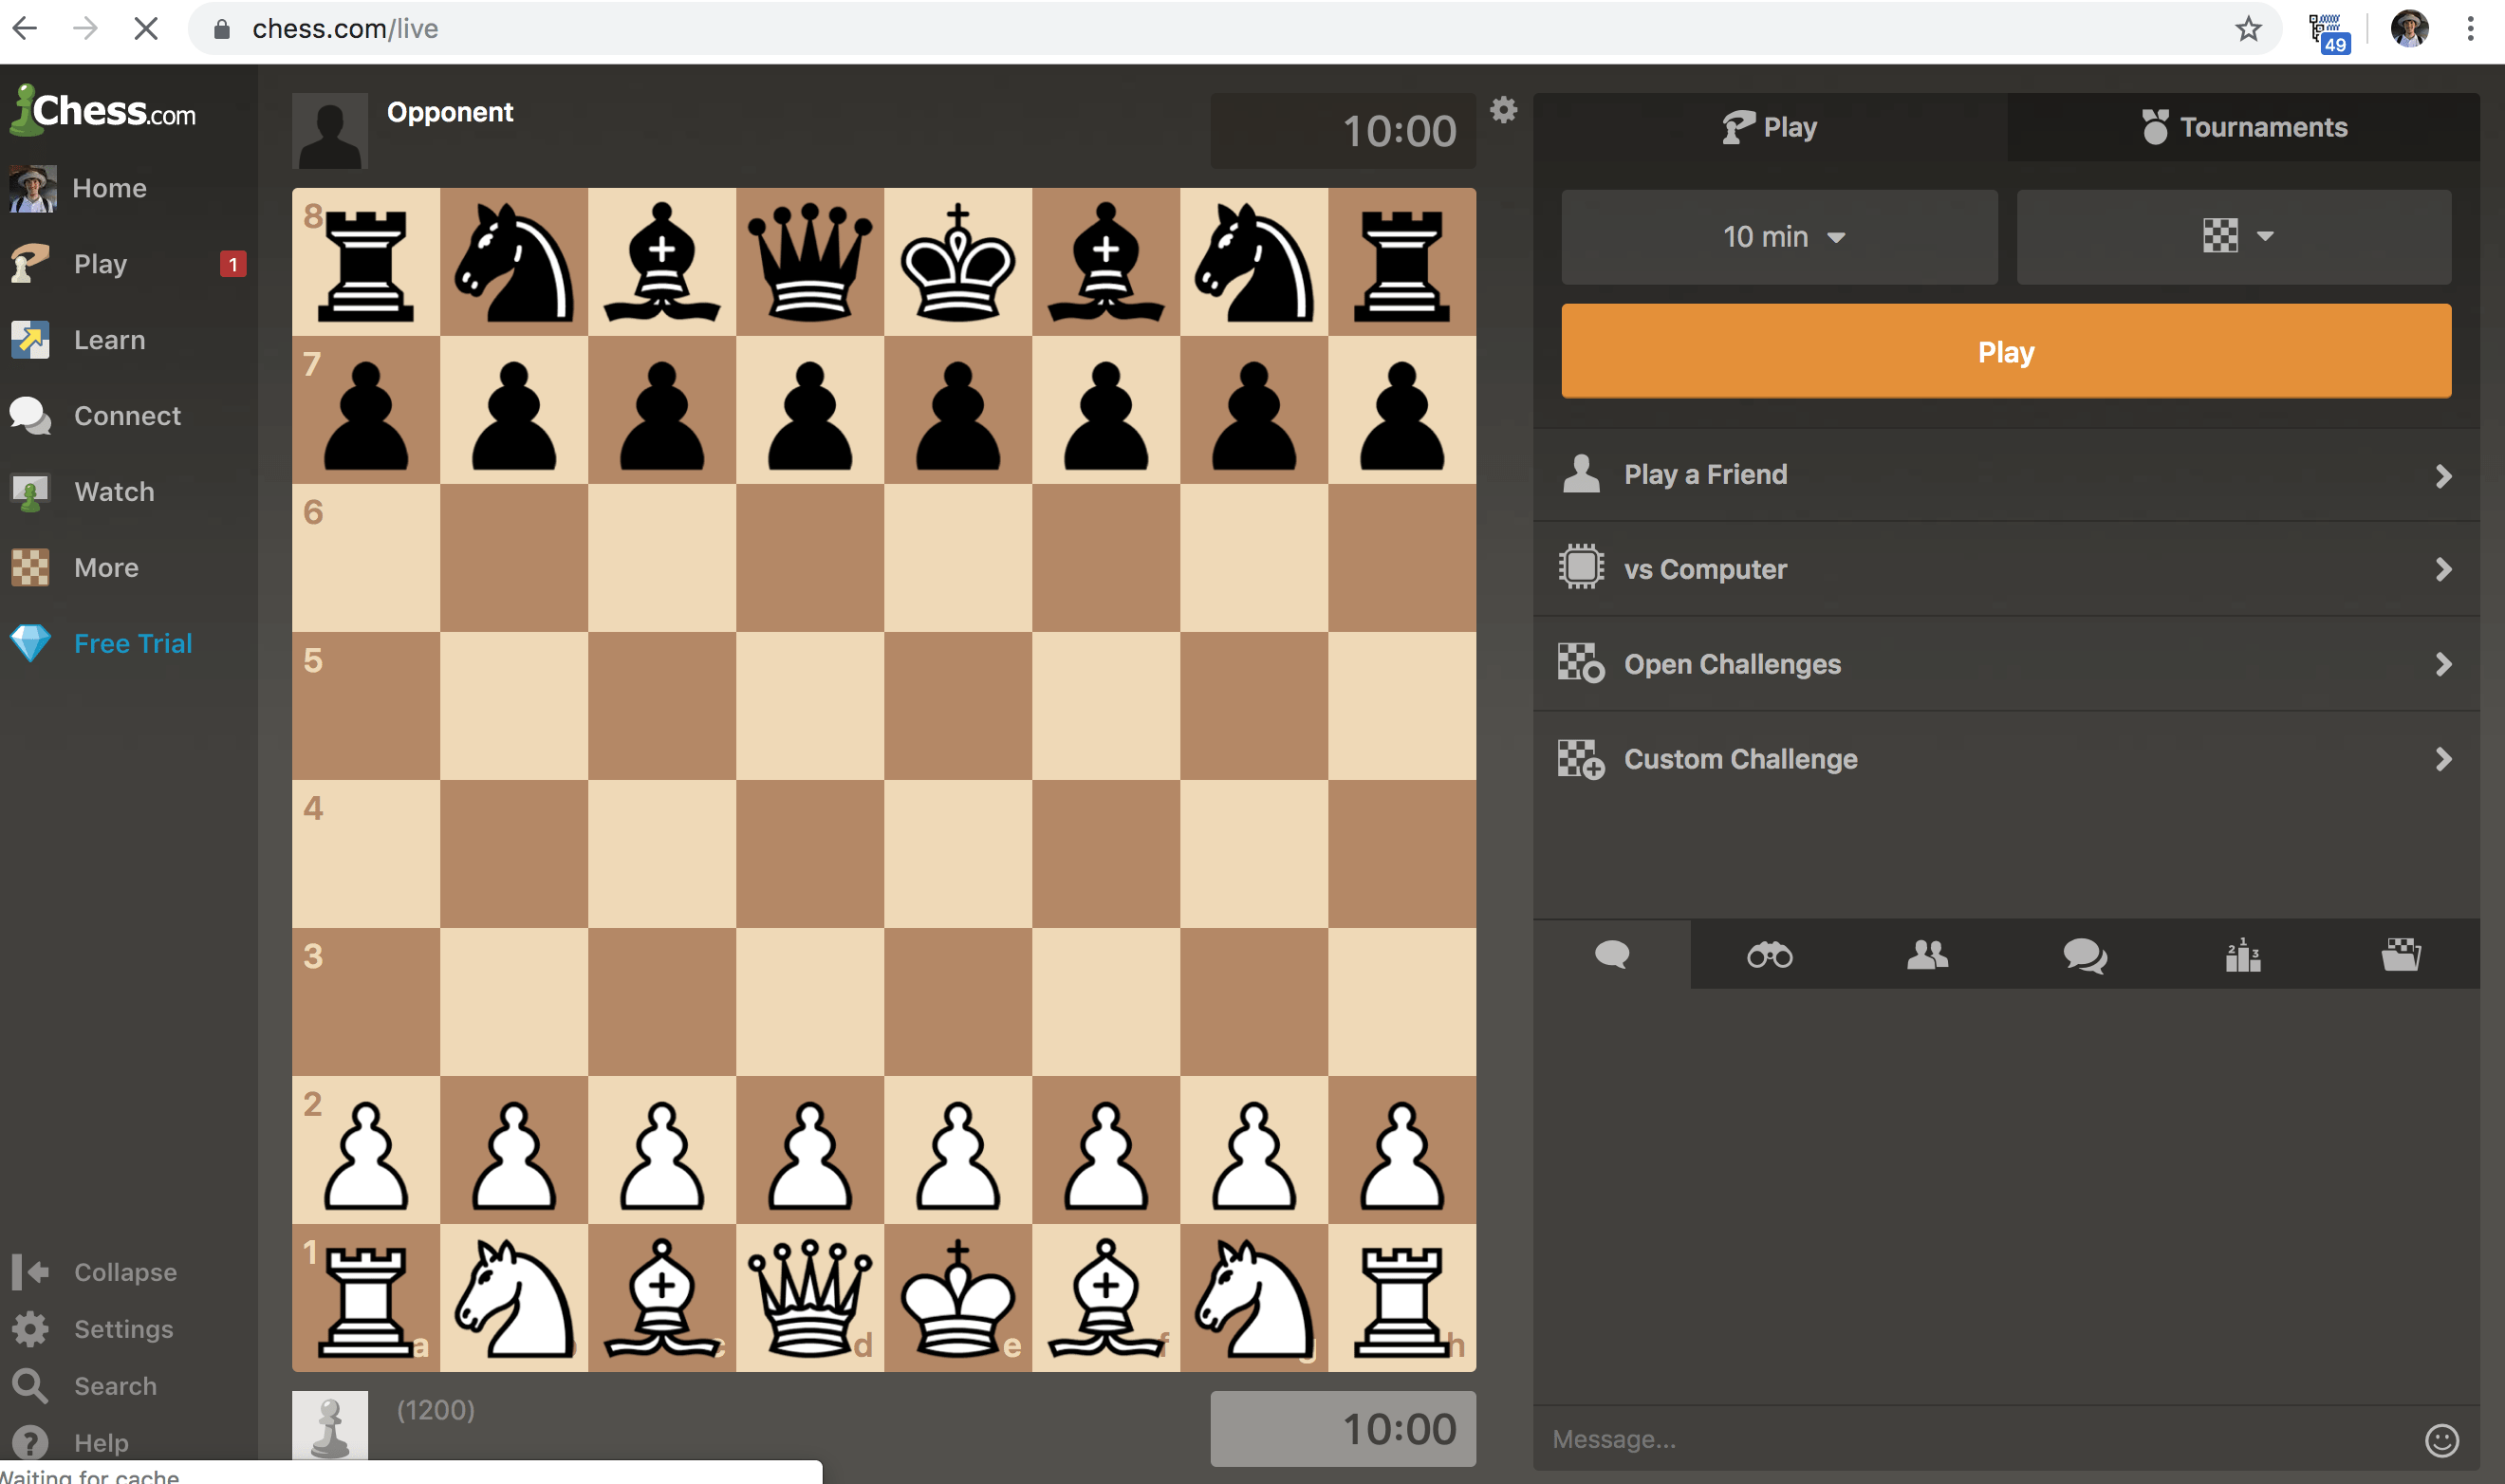 How can I watch a game? - Chess.com Member Support and FAQs